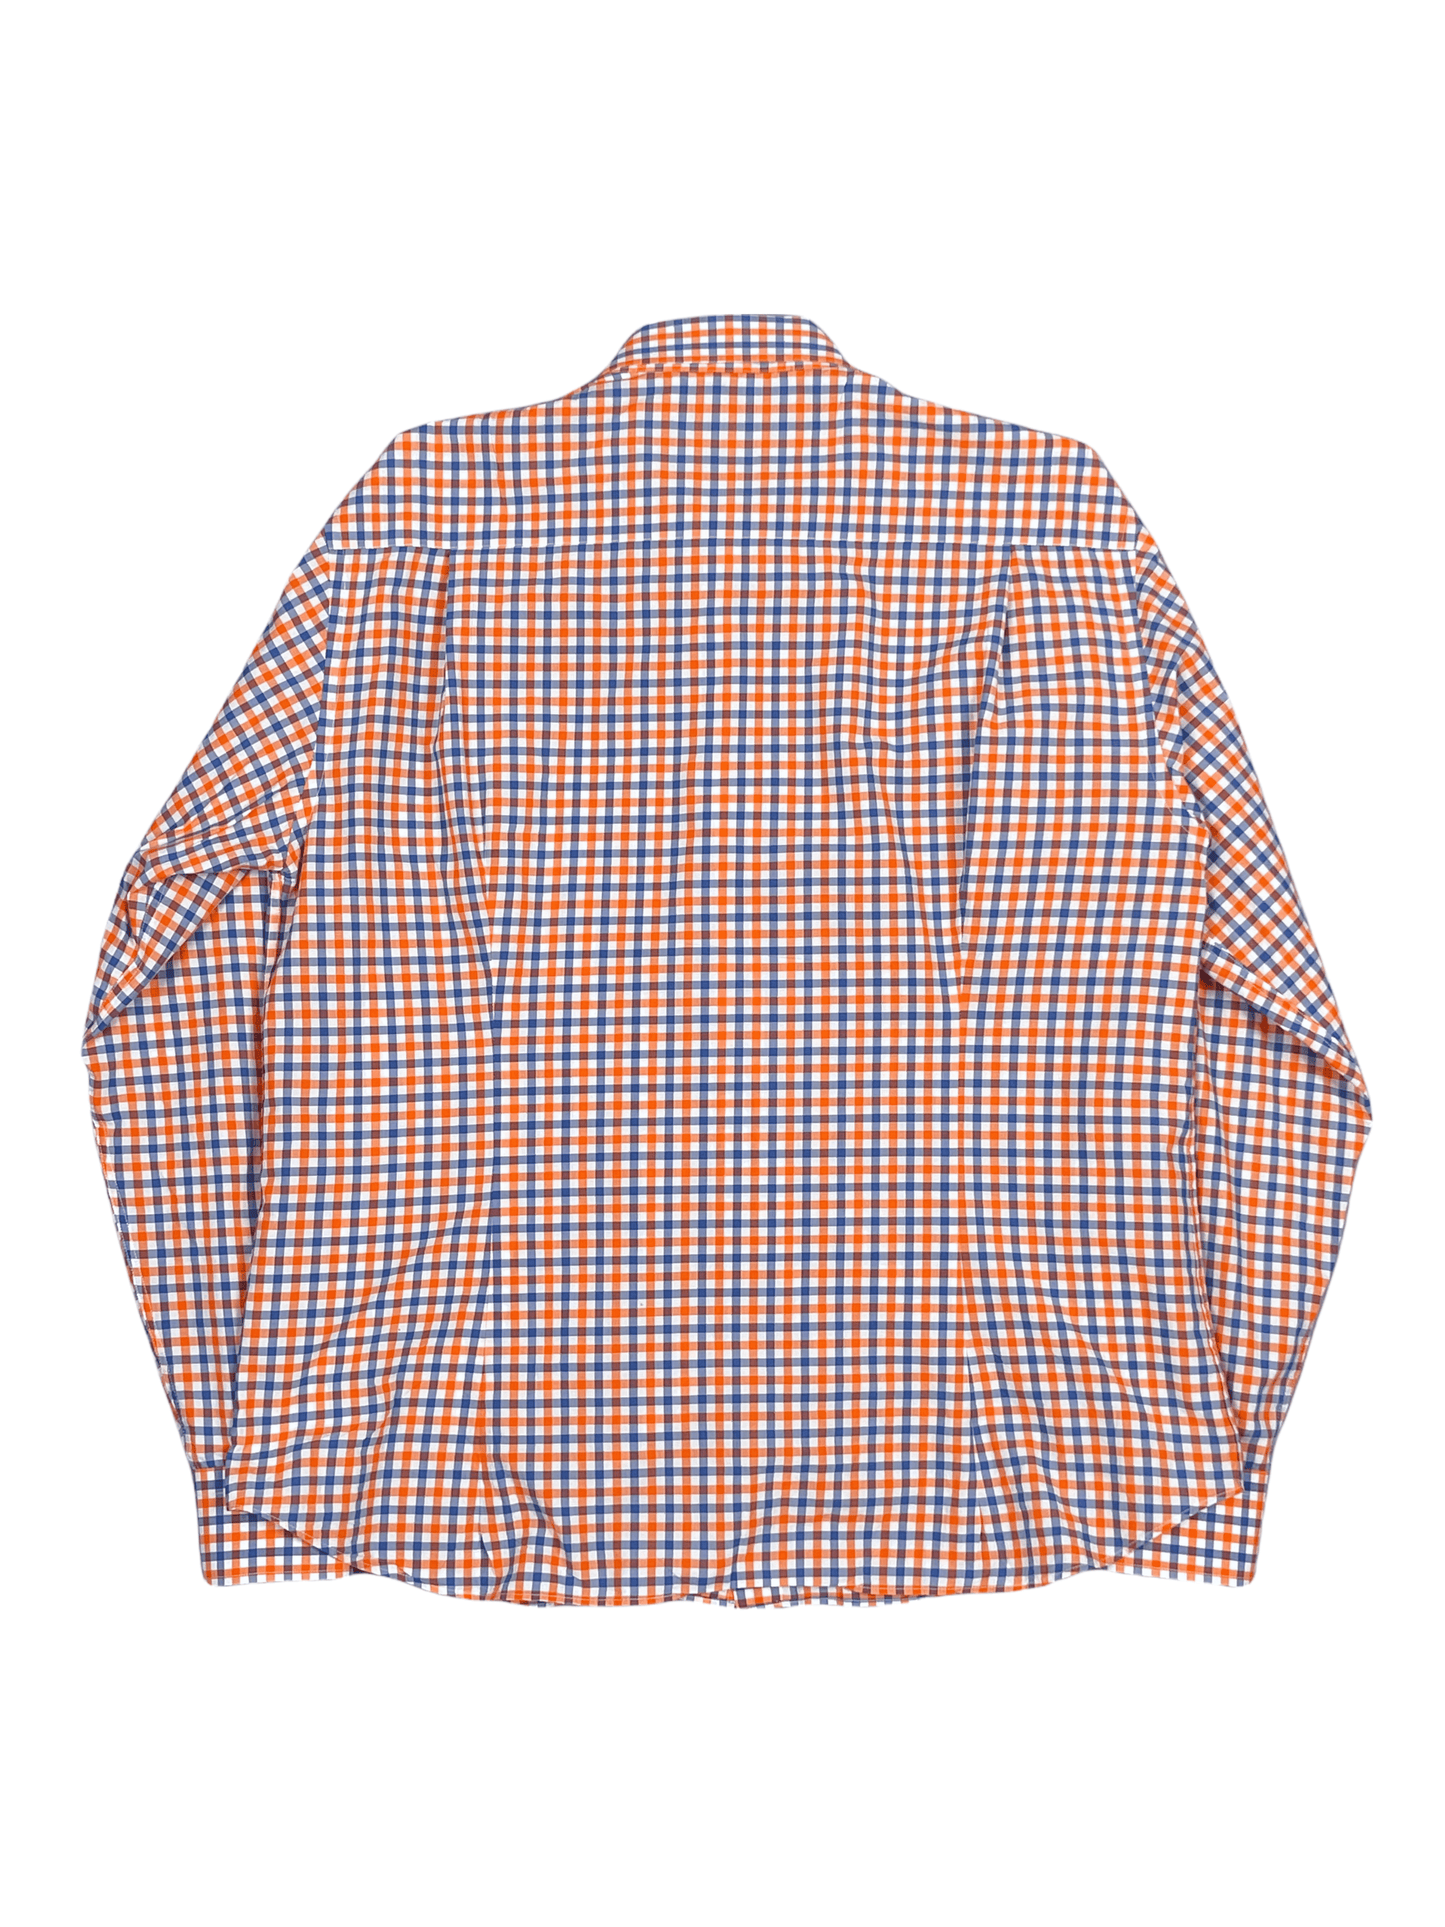 Paul & Shark Orange Blue Gingham 17 / 43 - Genuine Design Luxury Consignment for Men. New & Pre-Owned Clothing, Shoes, & Accessories. Calgary, Canada